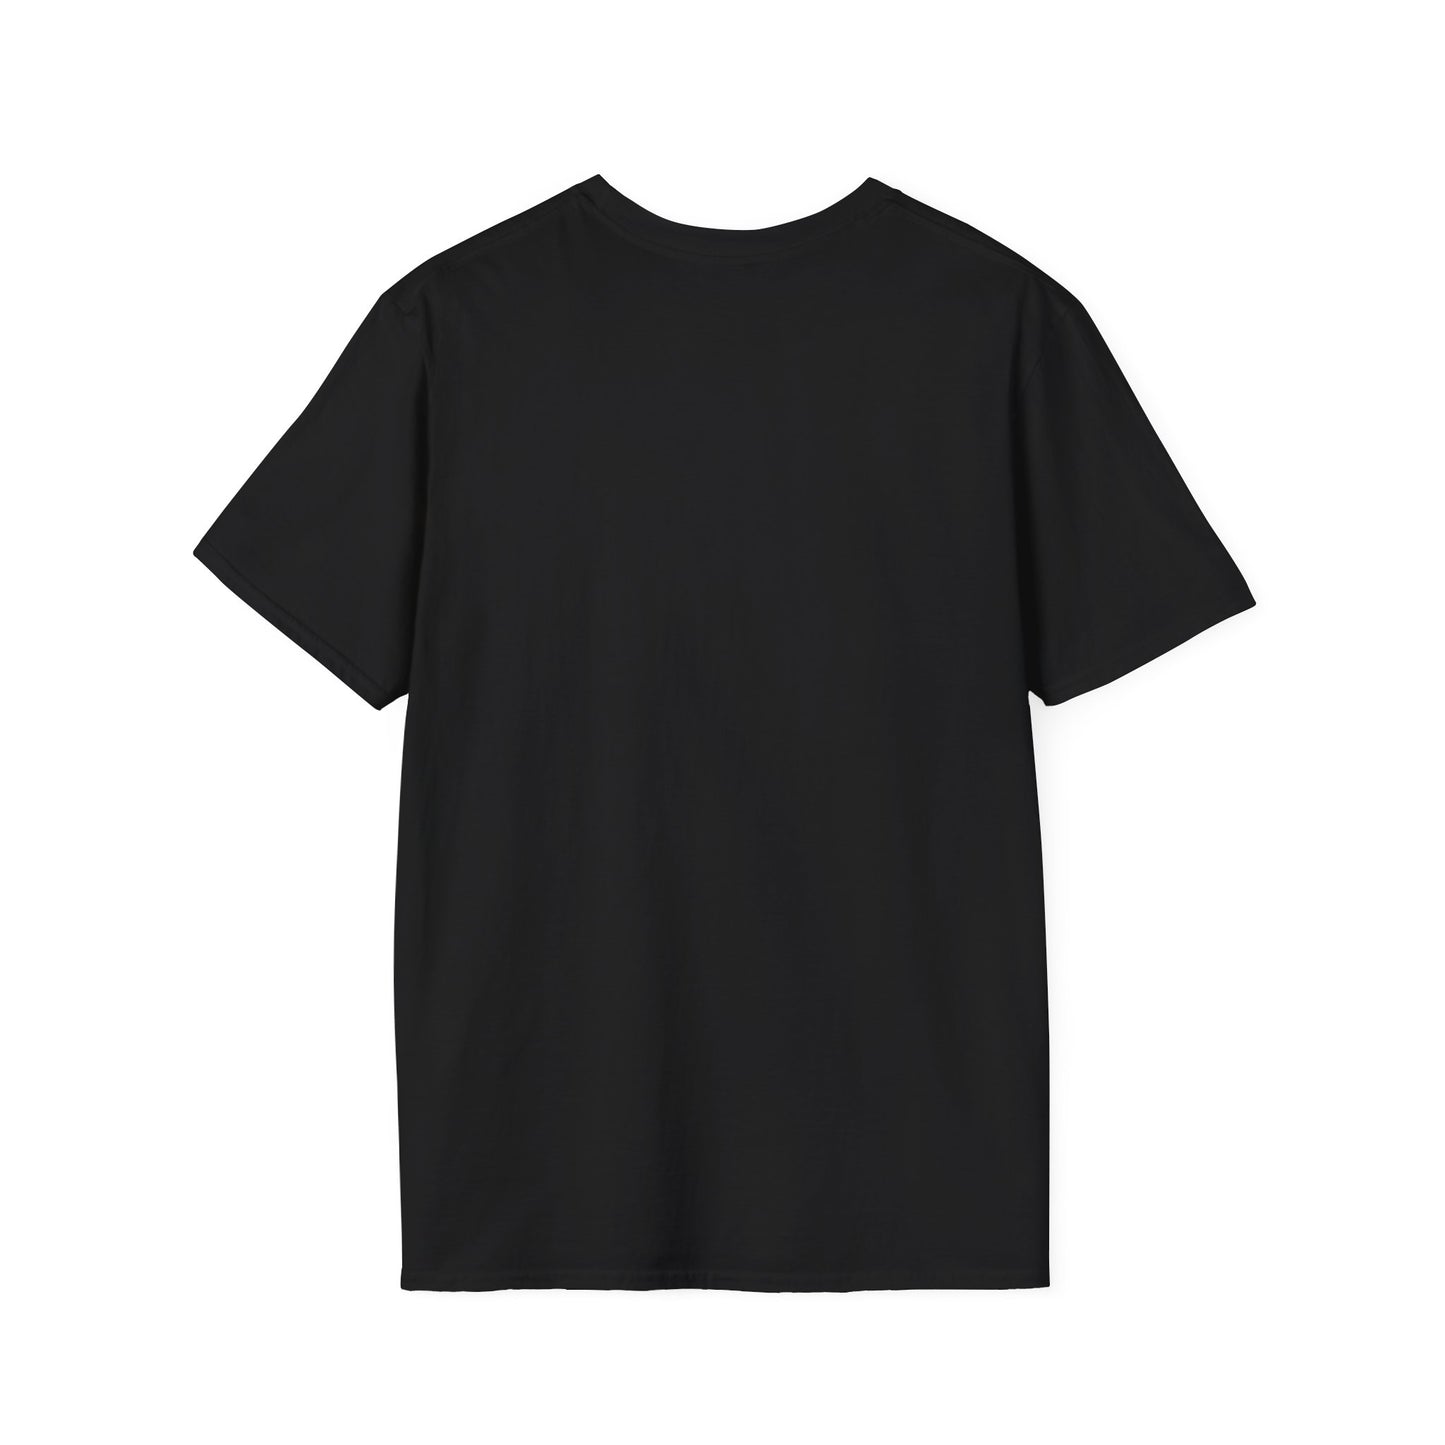 FAFO Black Ops - Unisex Softstyle T-Shirt